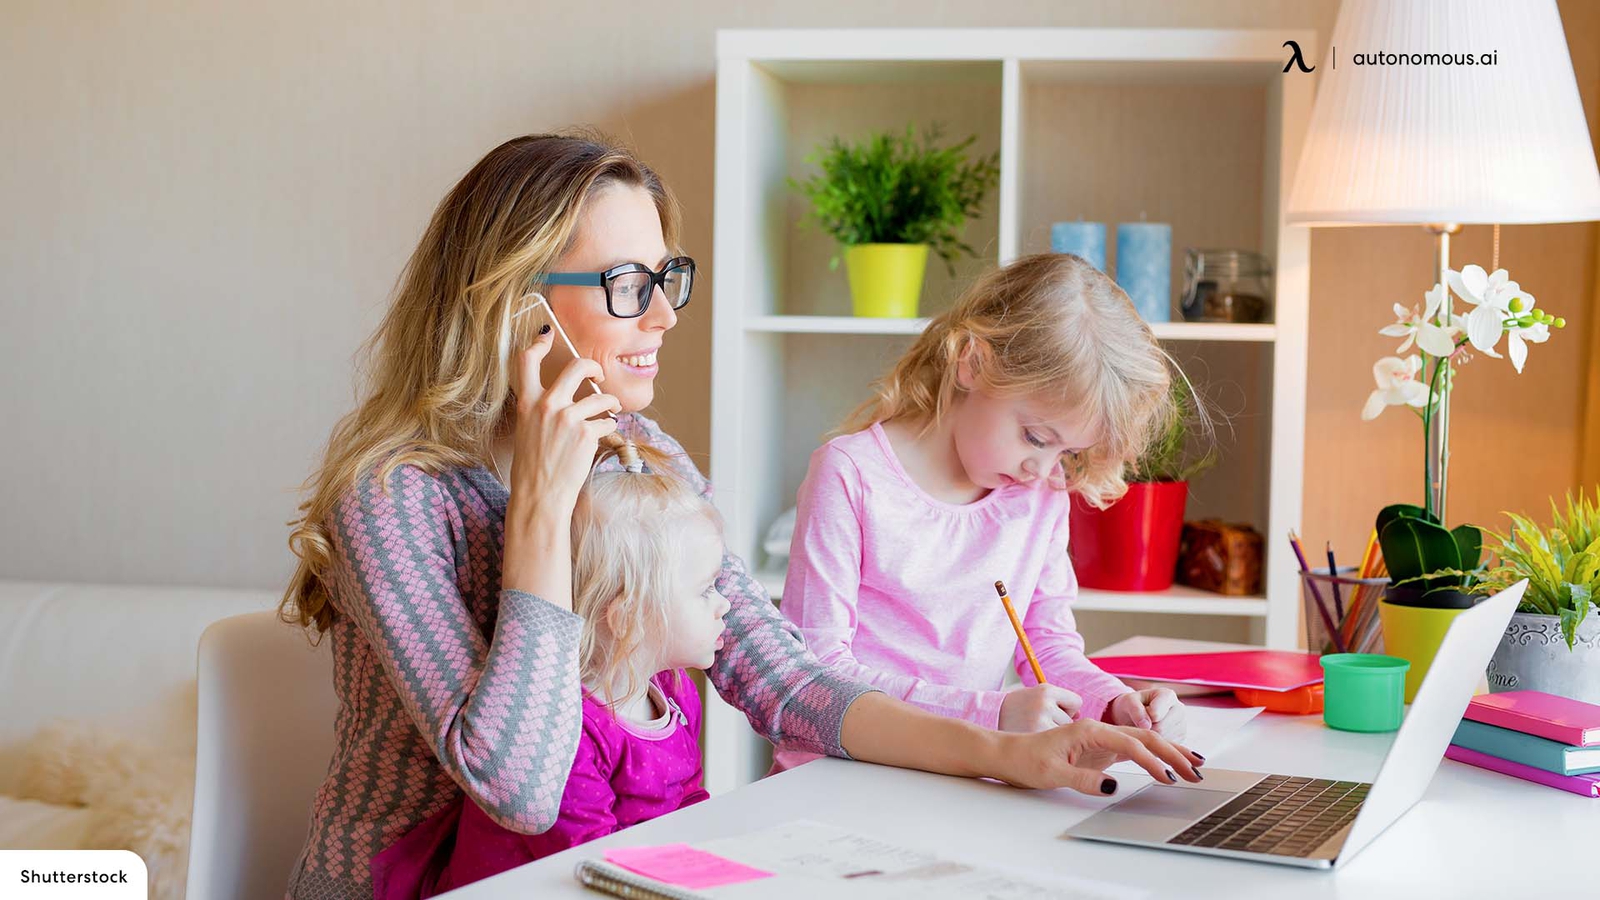 10 Great Online Work Ideas for Stay-At-Home Moms